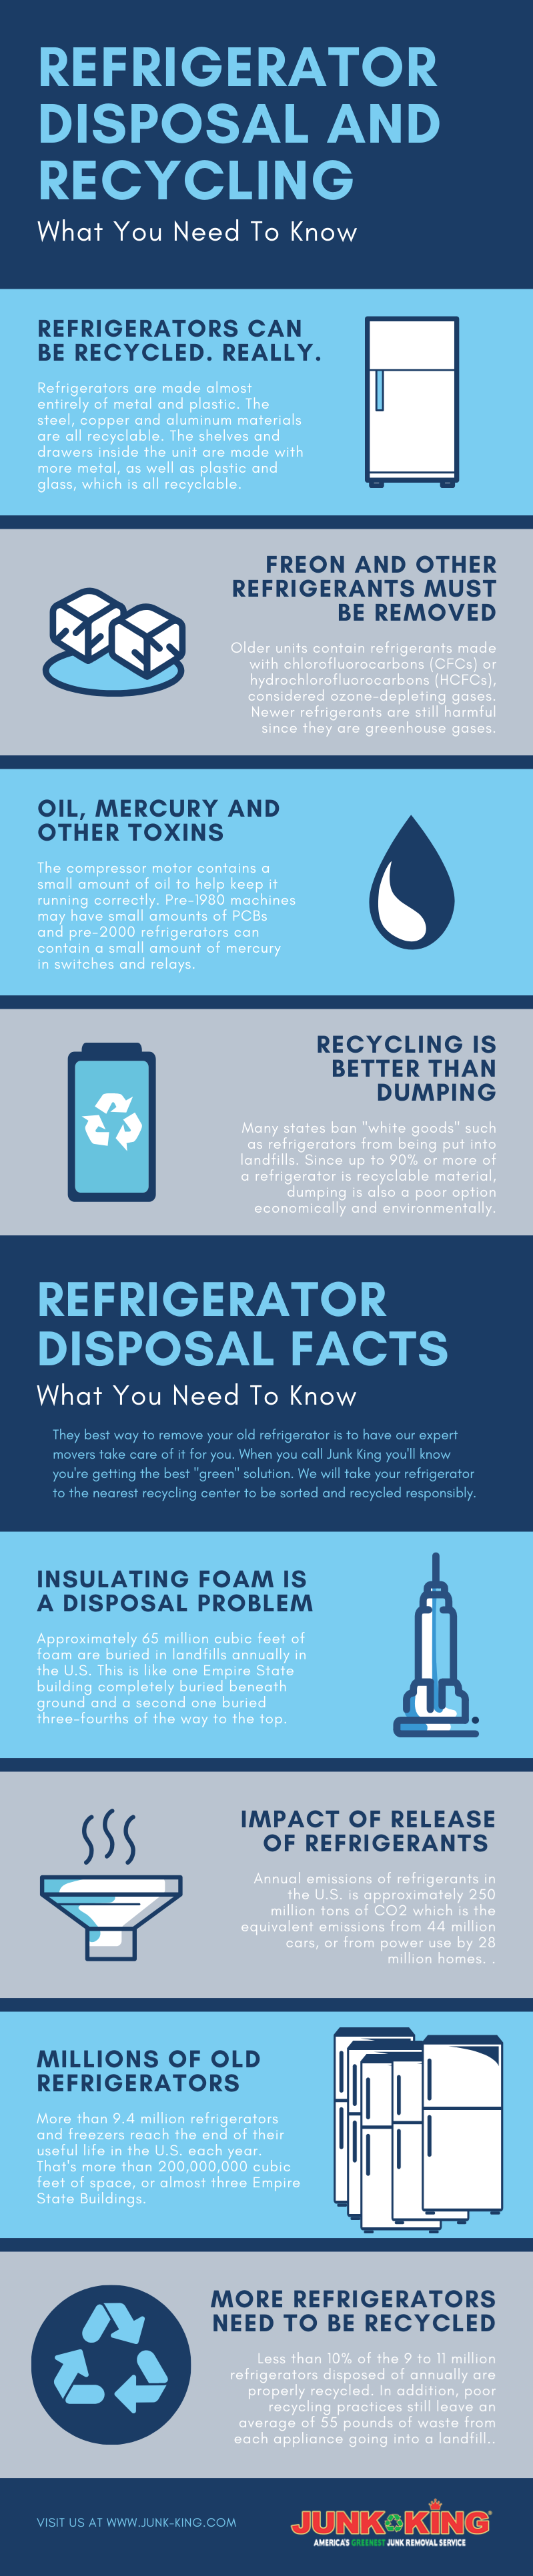 refrigerator-disposal-and-recycling-infographic-png-1